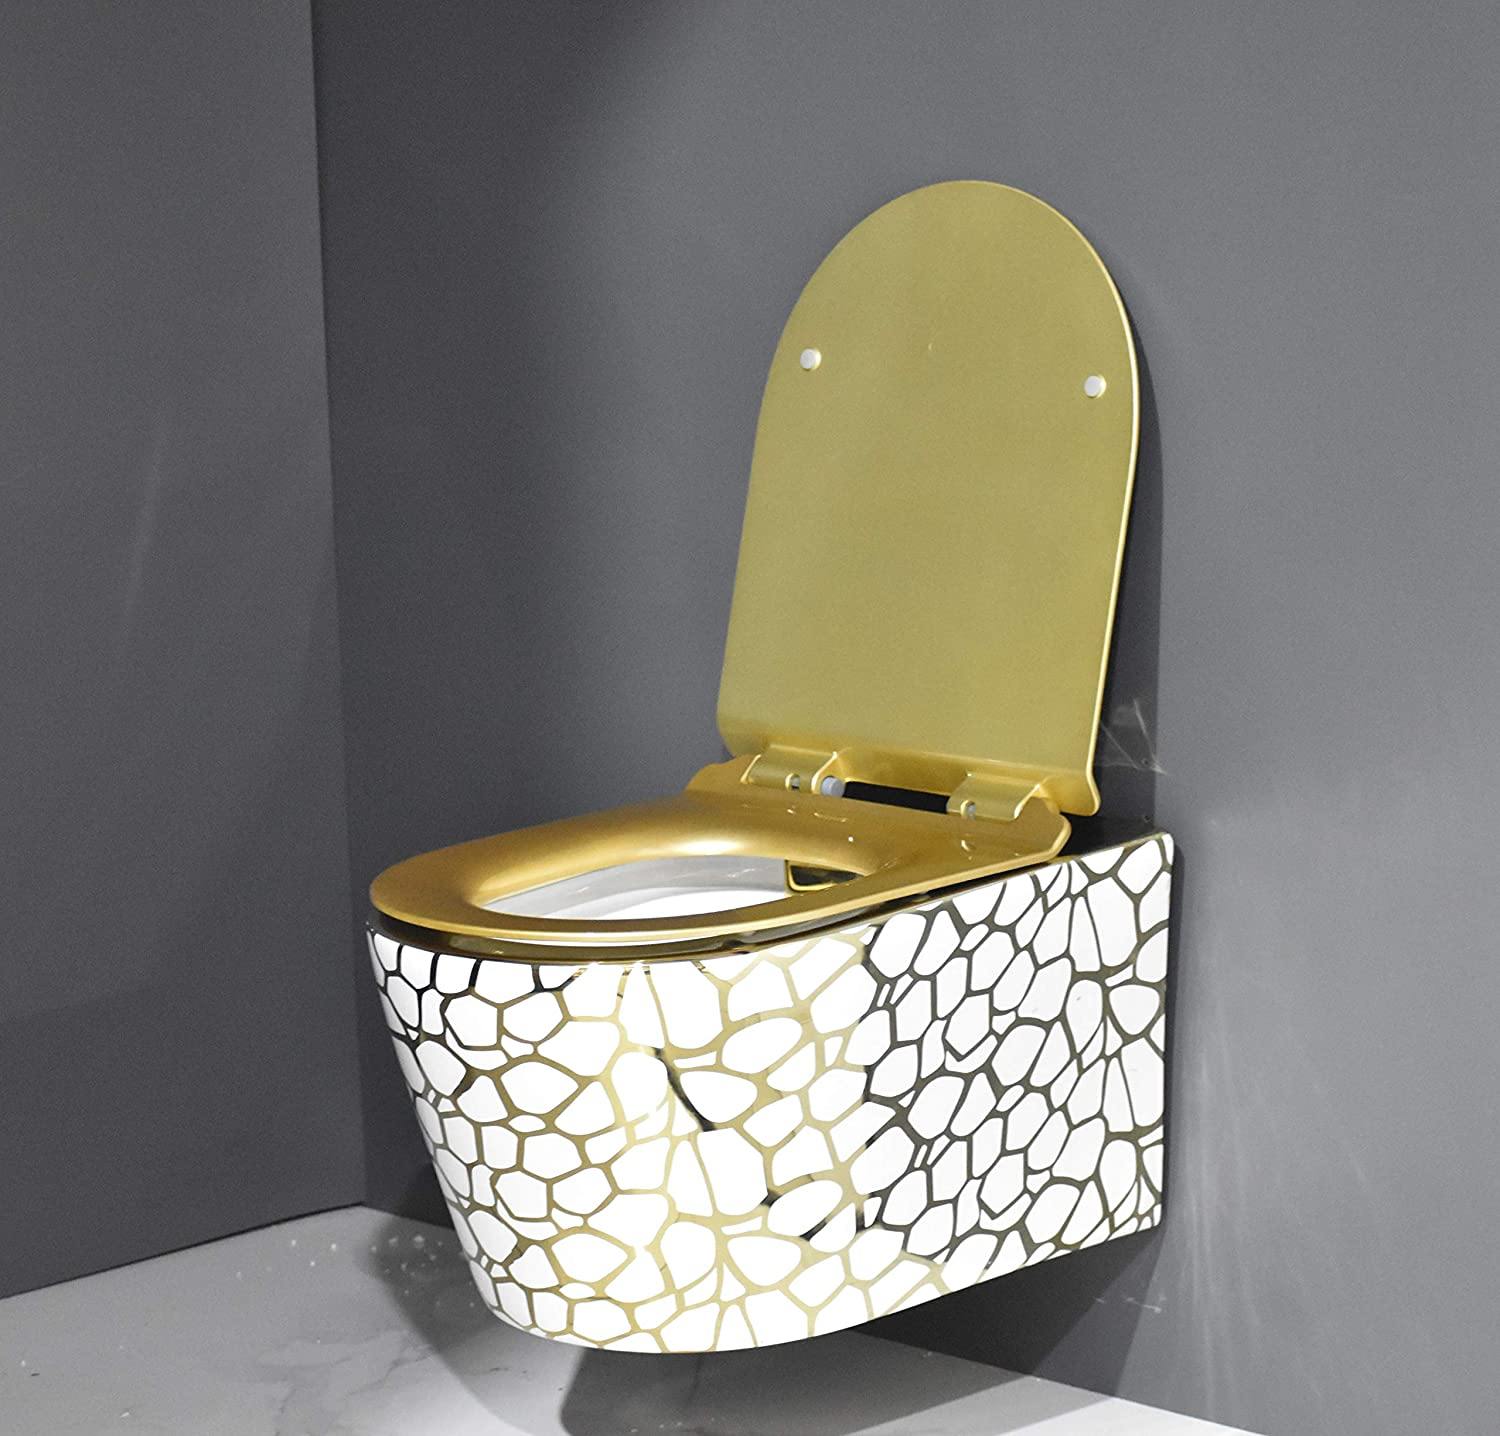 Ceramic Commode Wall Mount/Wall Hung Western Toilet/Commode/Water Closet/EWC/WC/European Commode with Soft Close Seat Cover in Gold Color - Bath Outlet